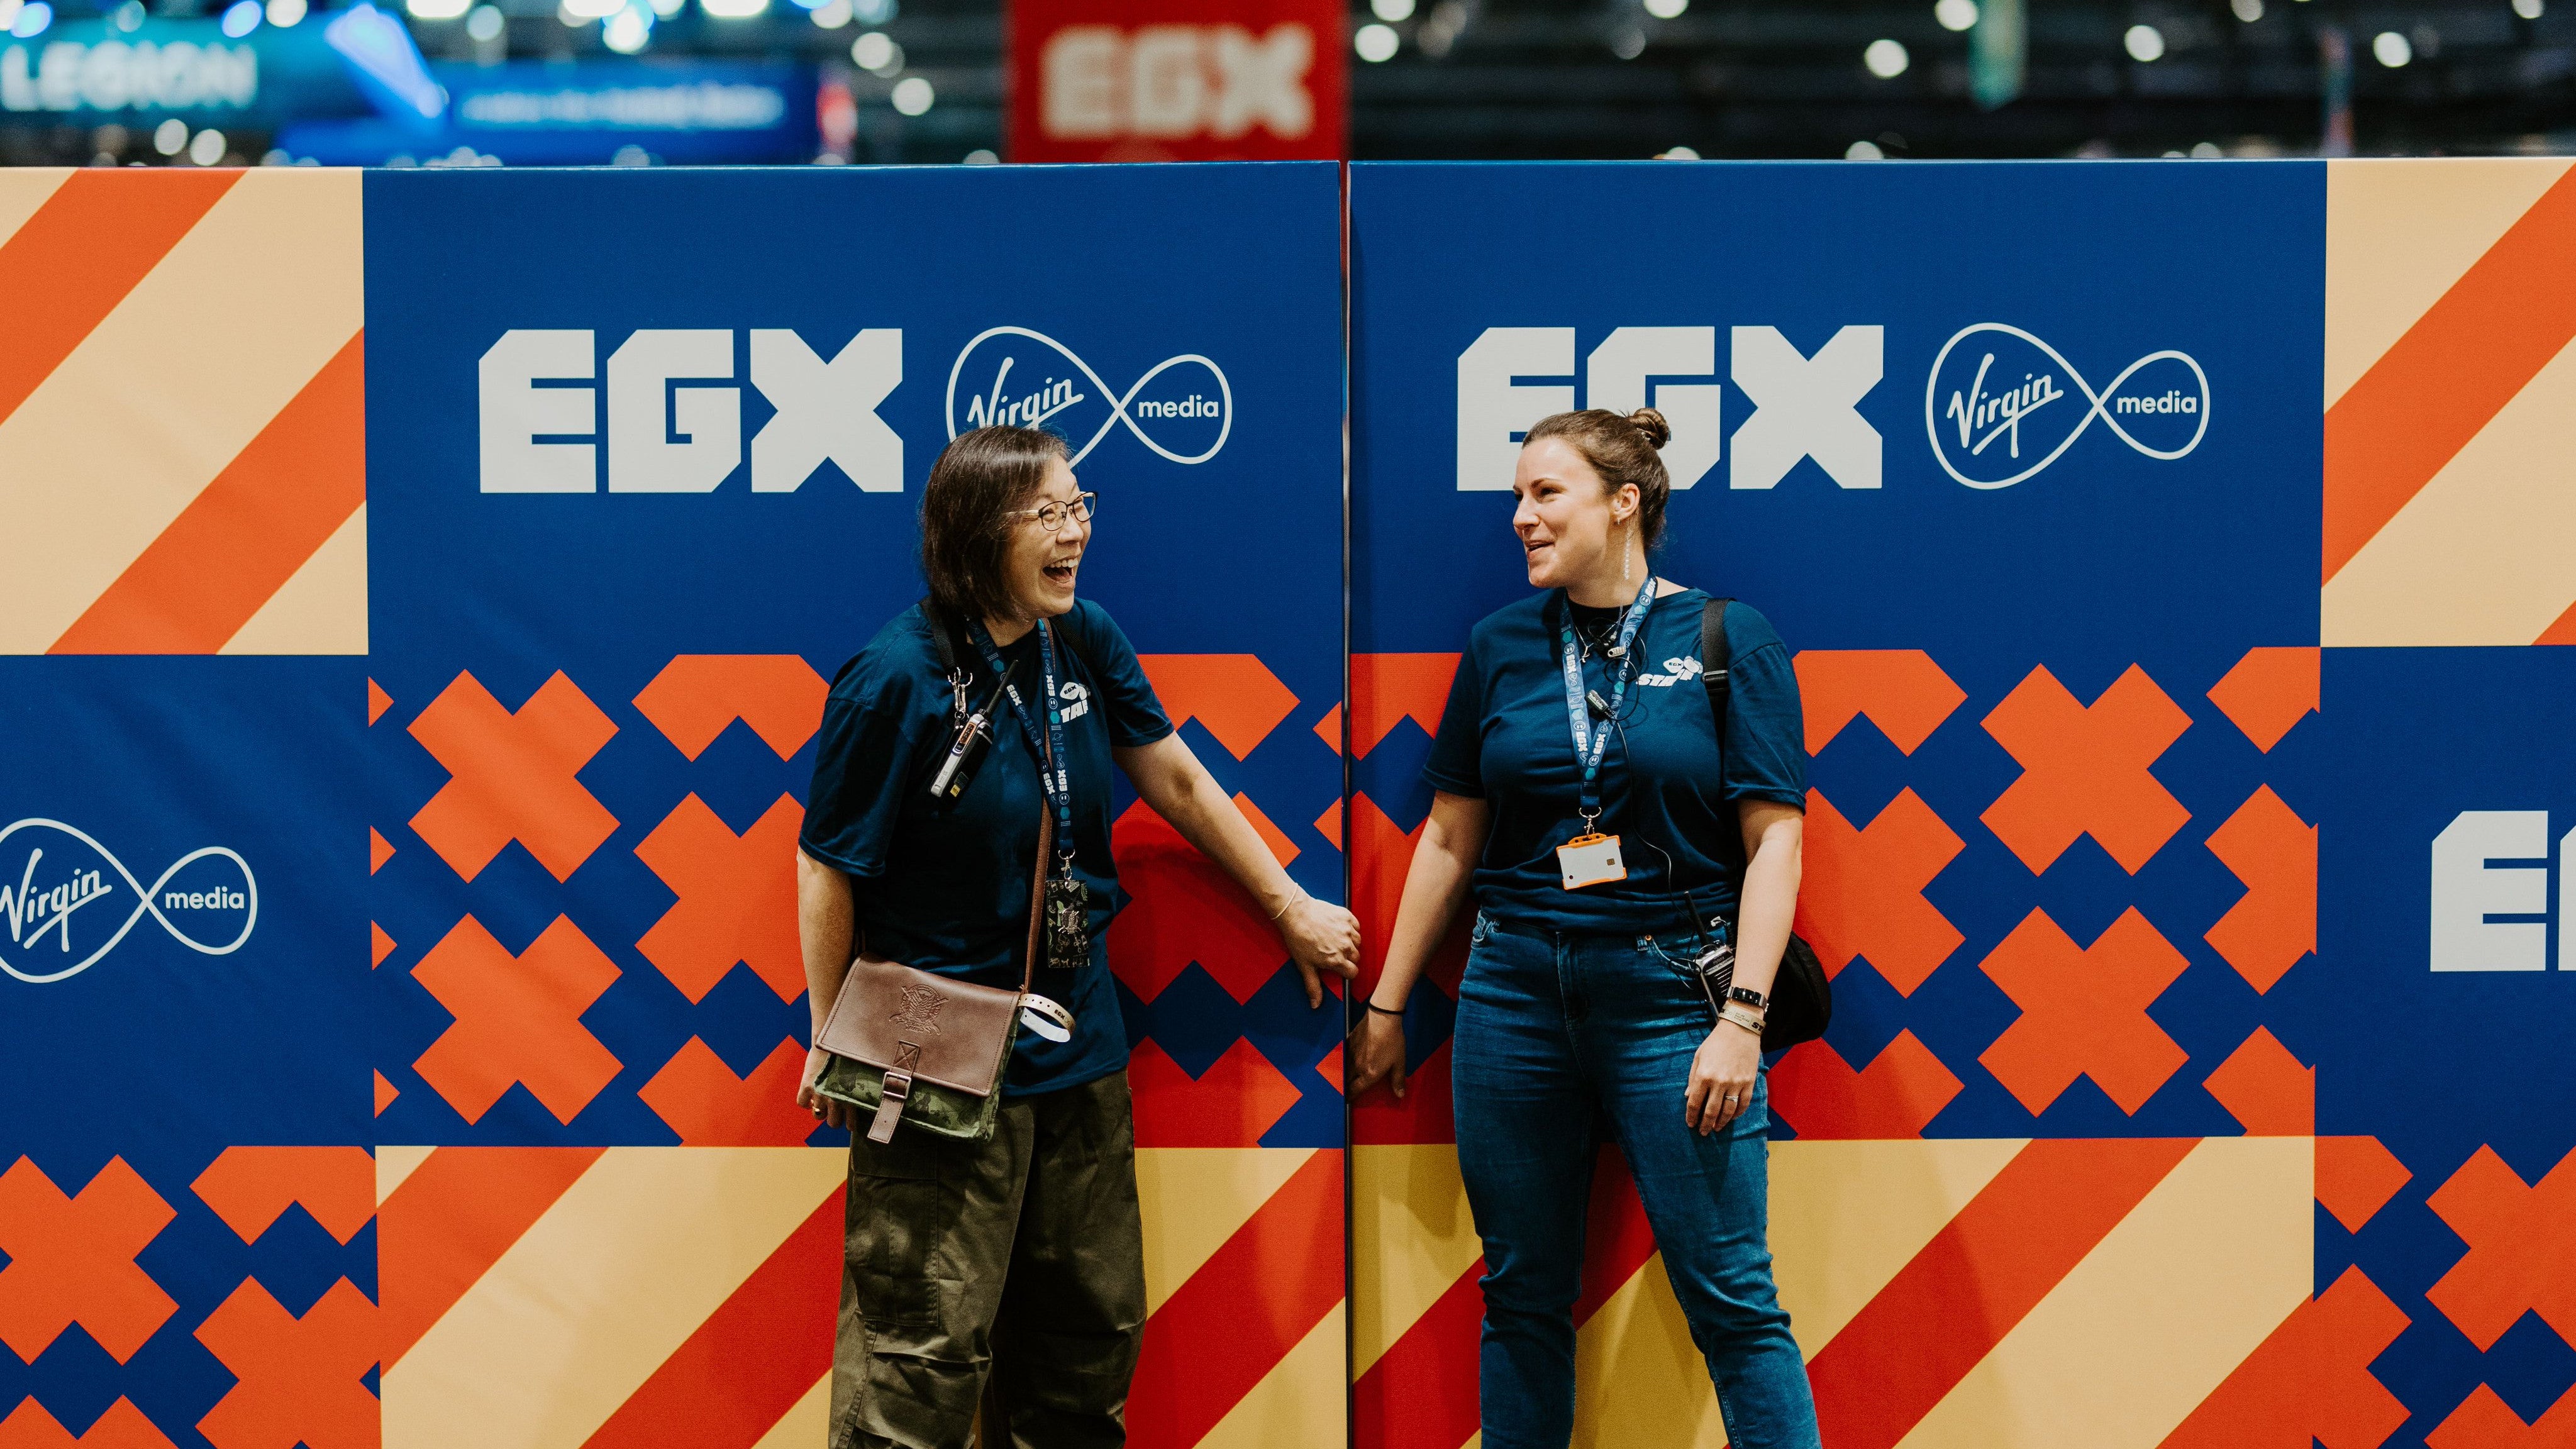 A photo of EGX staff preparing to open the doors for the day.